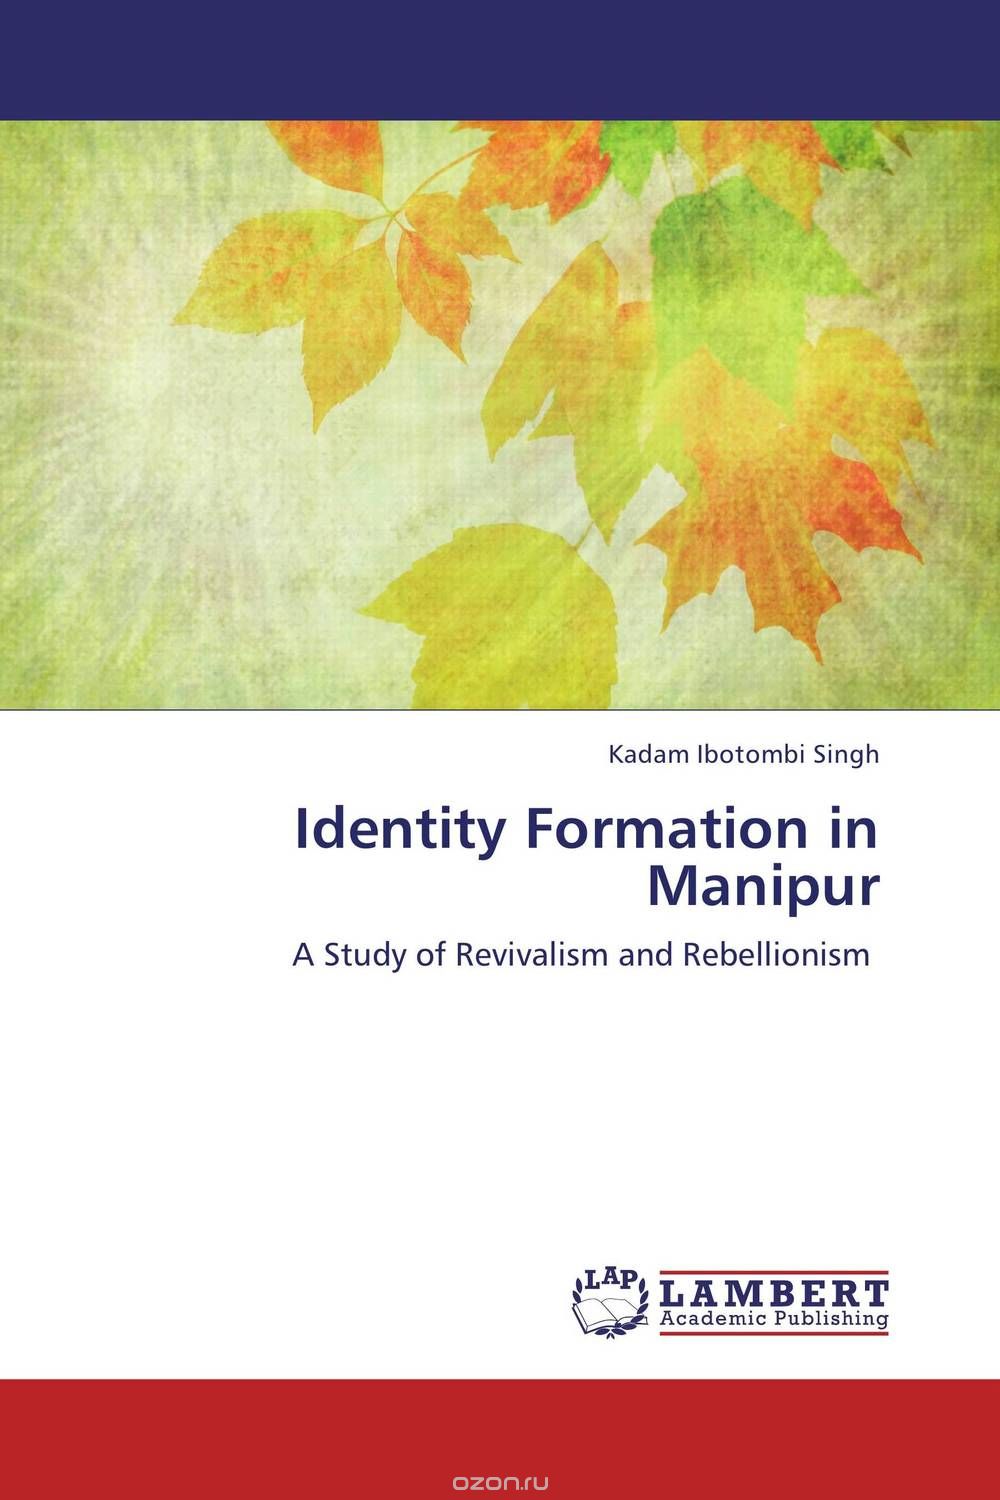 Identity Formation in Manipur